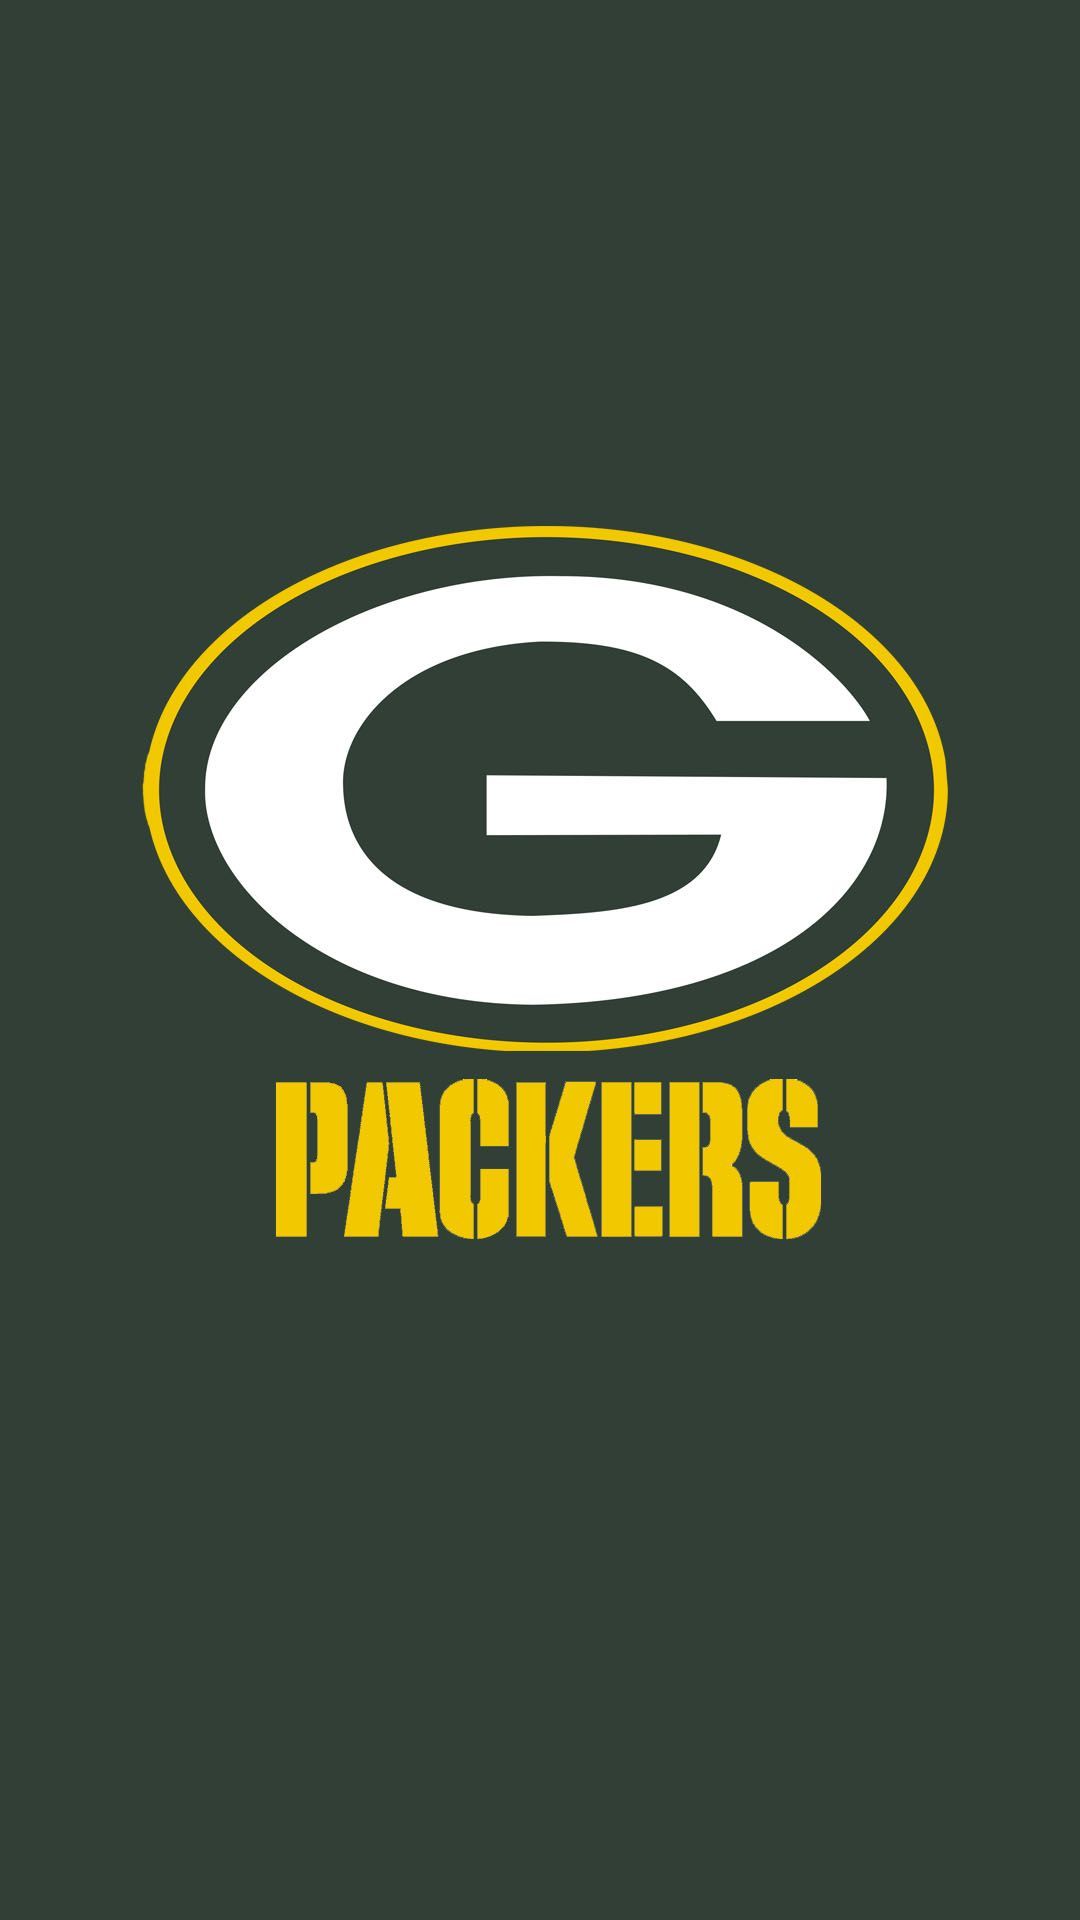 Green Bay Packers 2015 Wallpapers